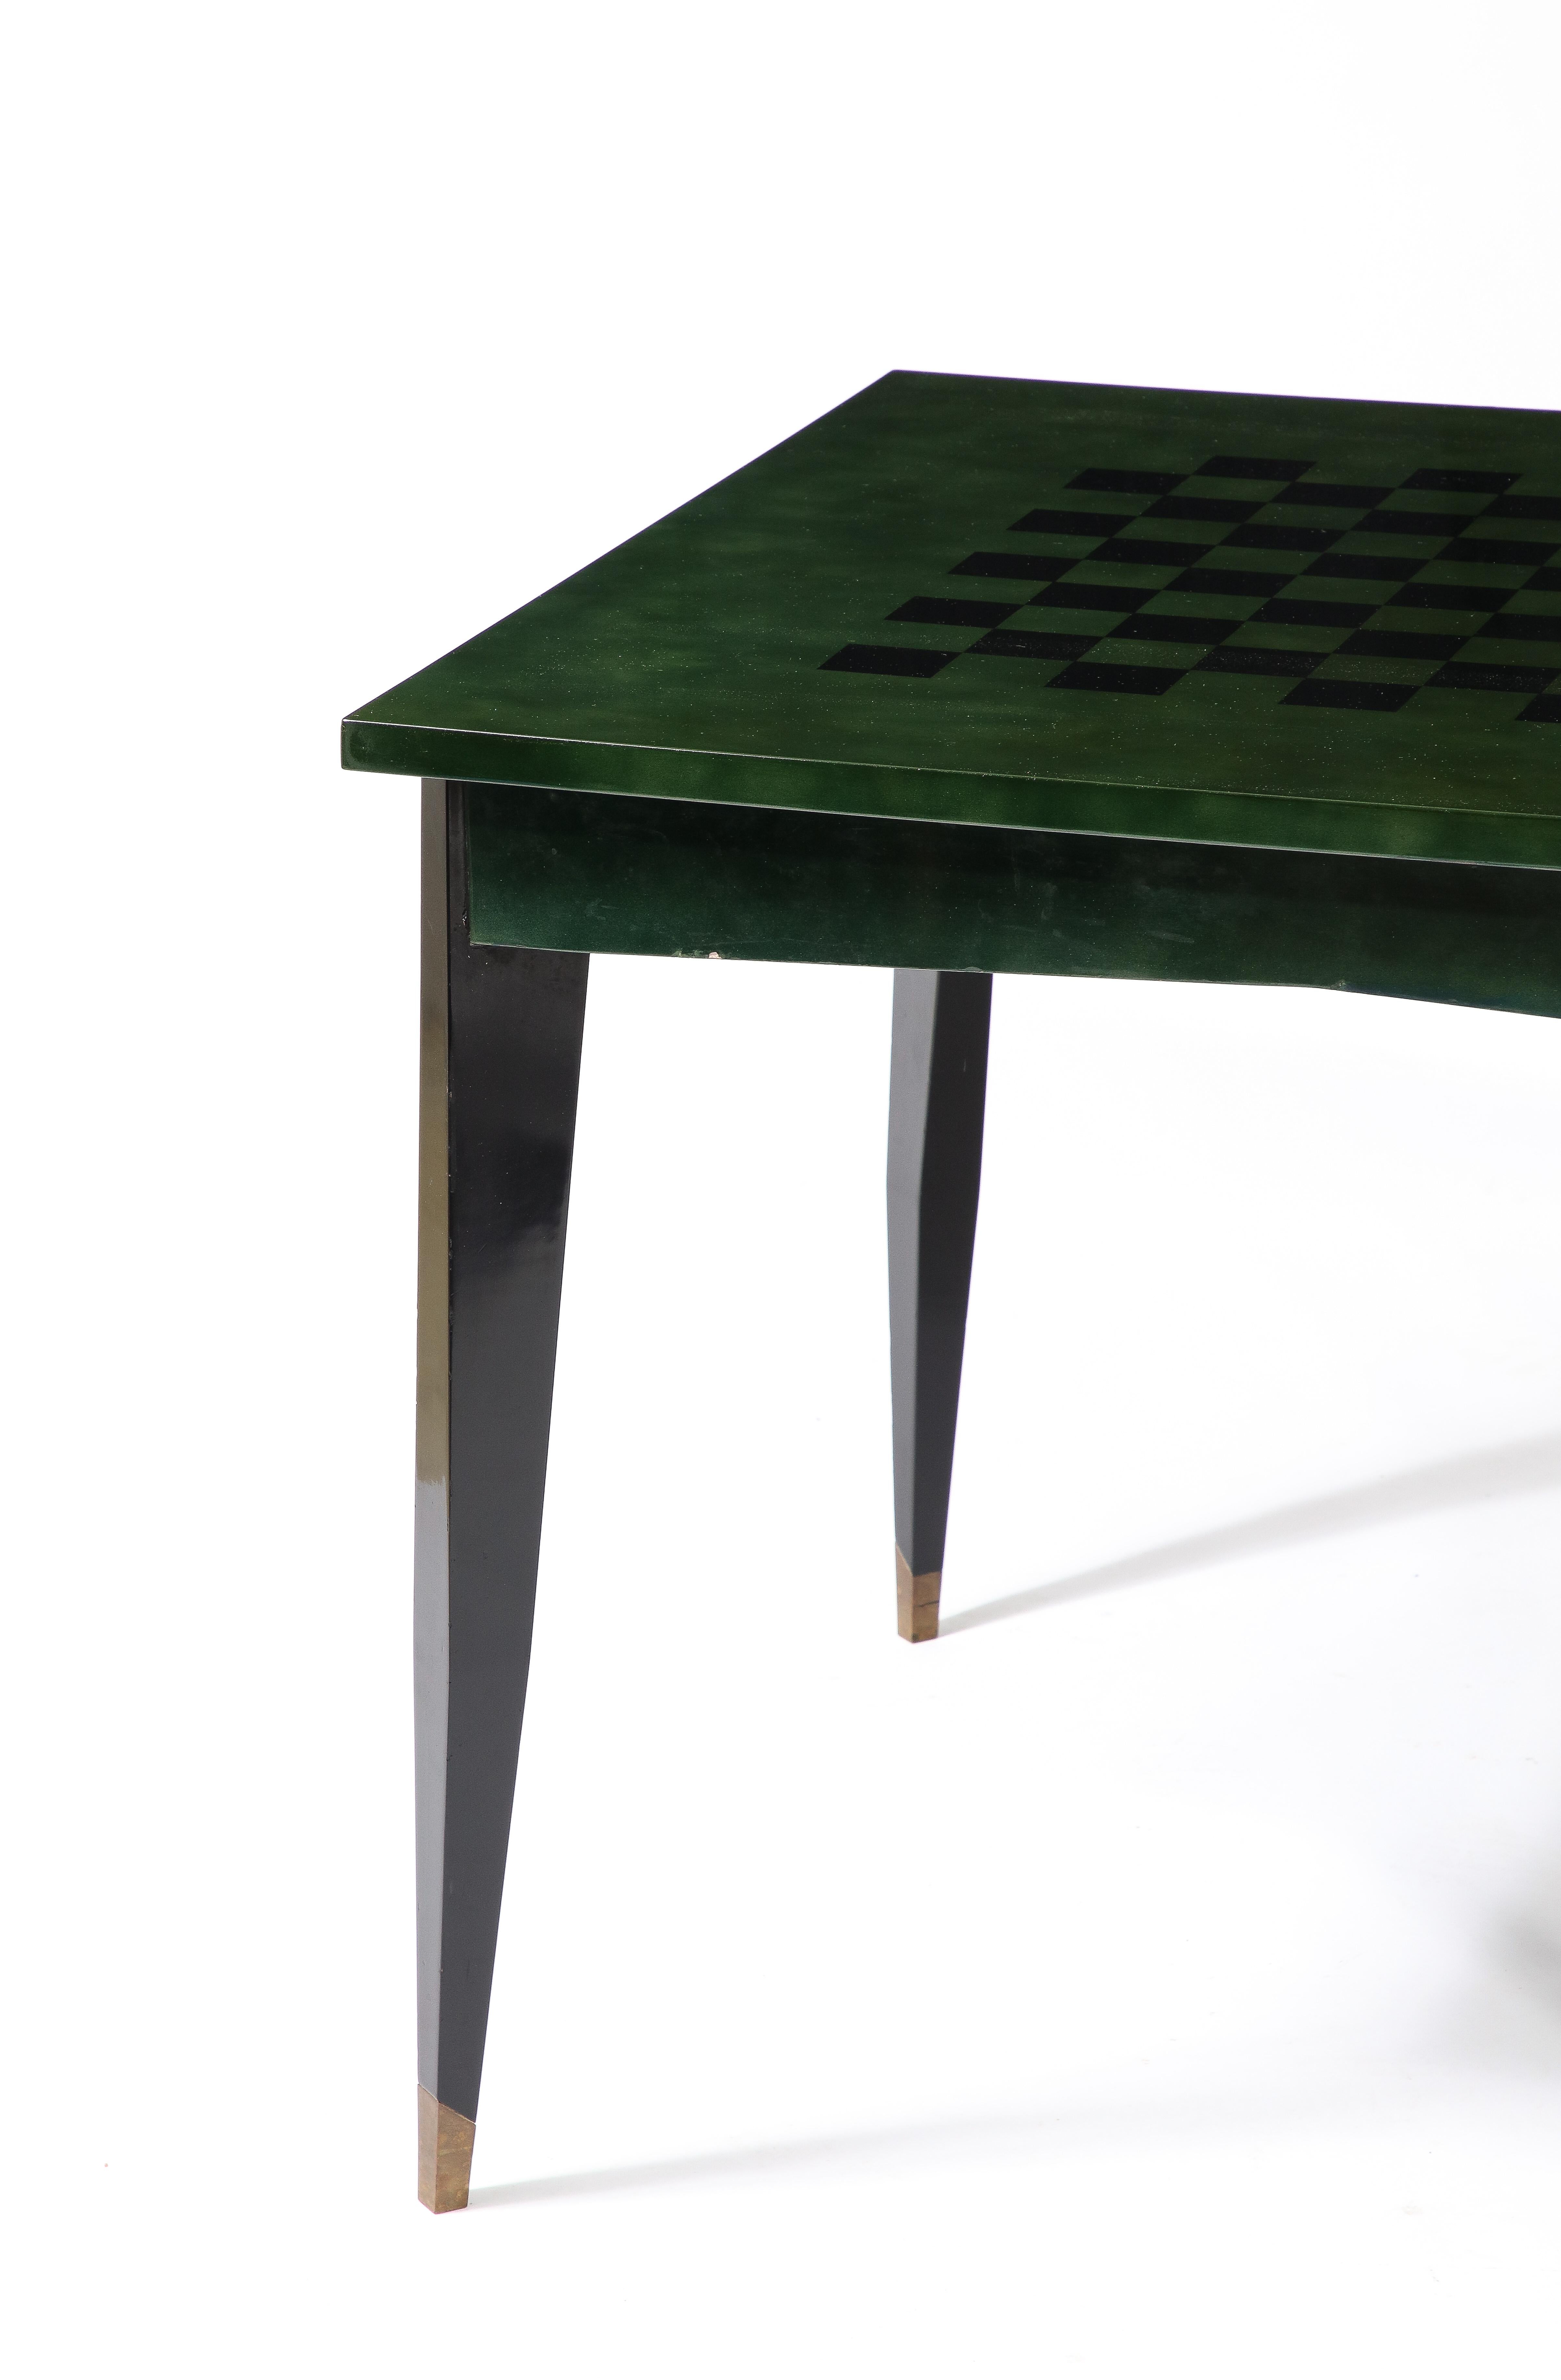 Mid-Century Modern Raphael Raffel Game Table in Green & Black Beka Lacquer, France 1950's For Sale